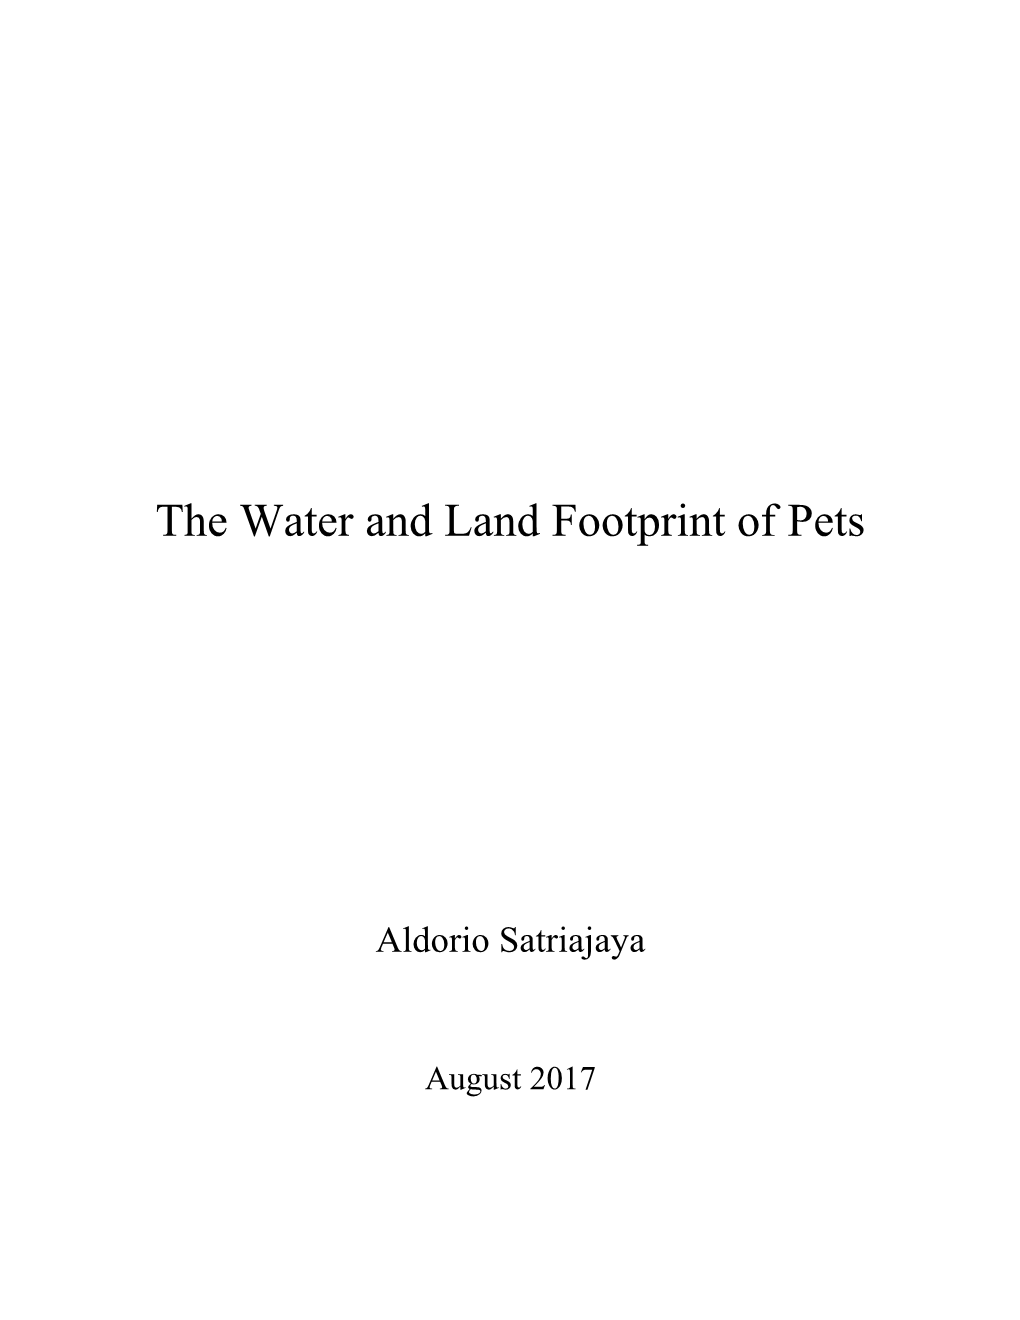 The Water and Land Footprint of Pets